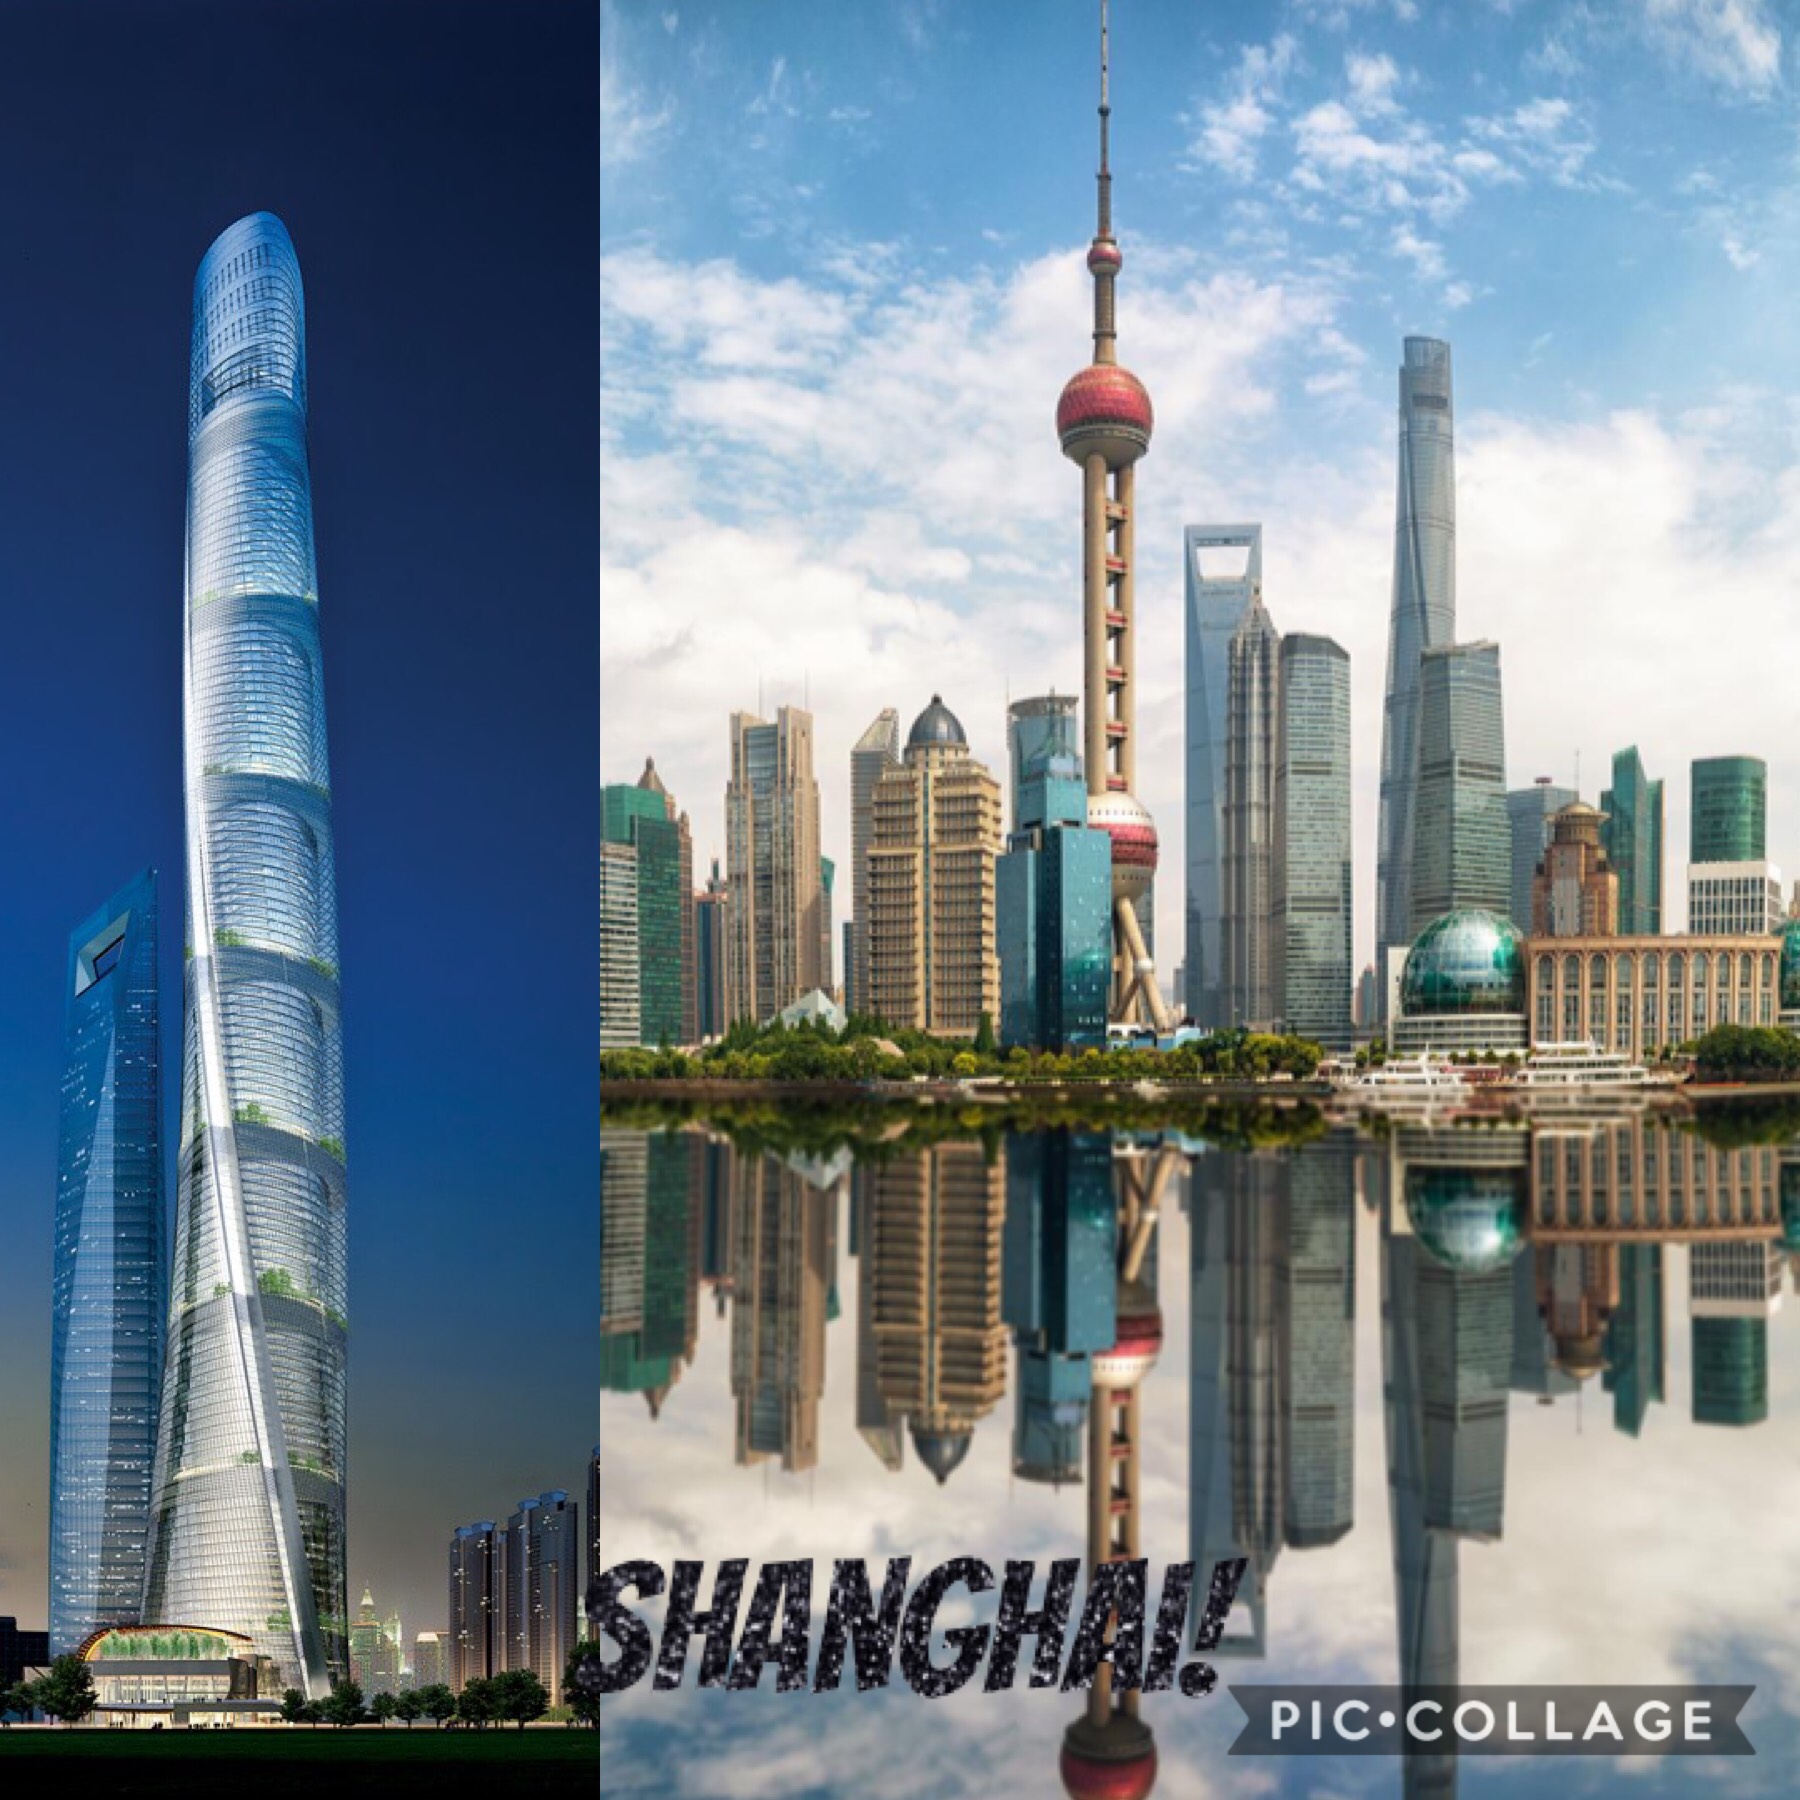 Shanghai could be big but that doesn’t mean I hate It!